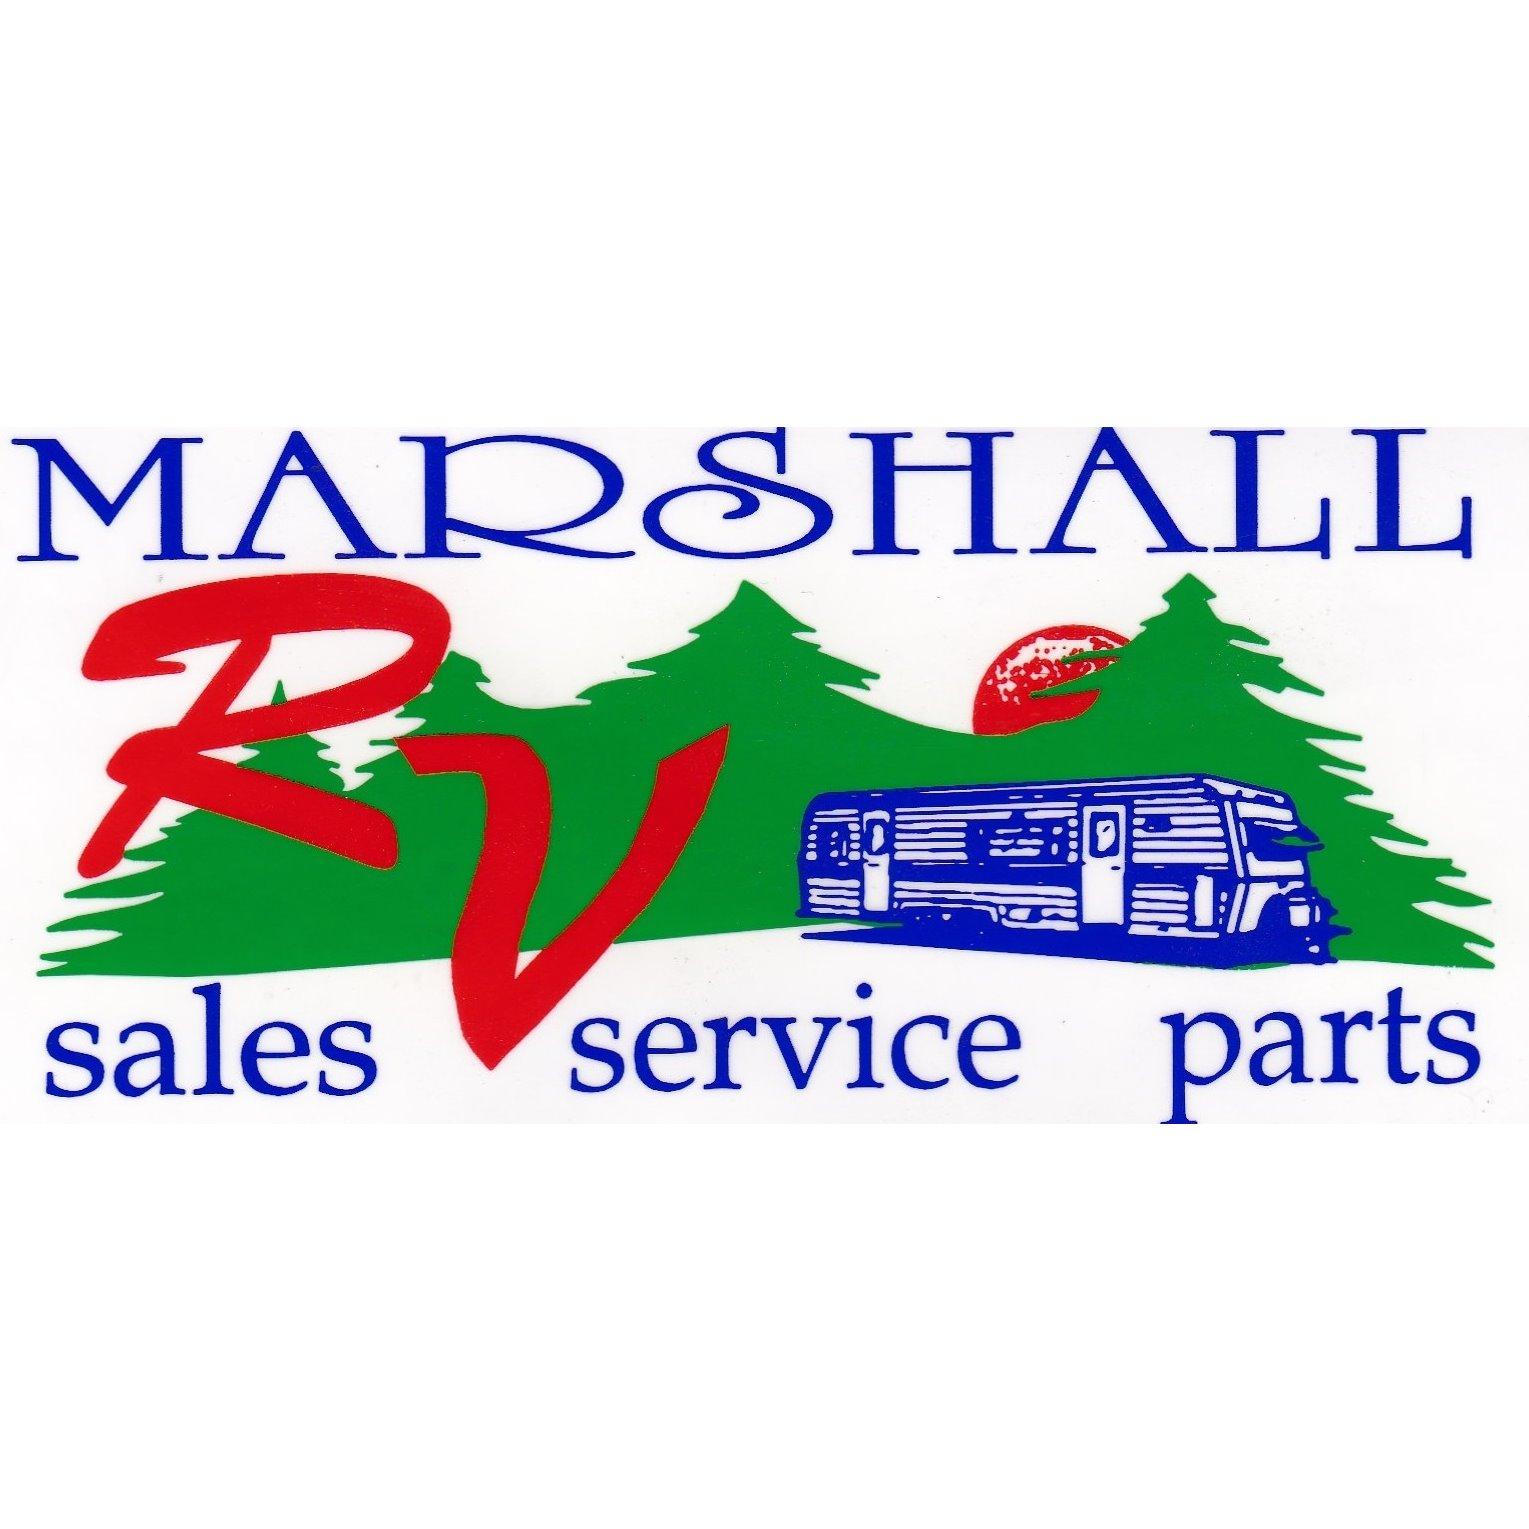 Marshall RV, Inc. Coupons near me in Marshall | 8coupons